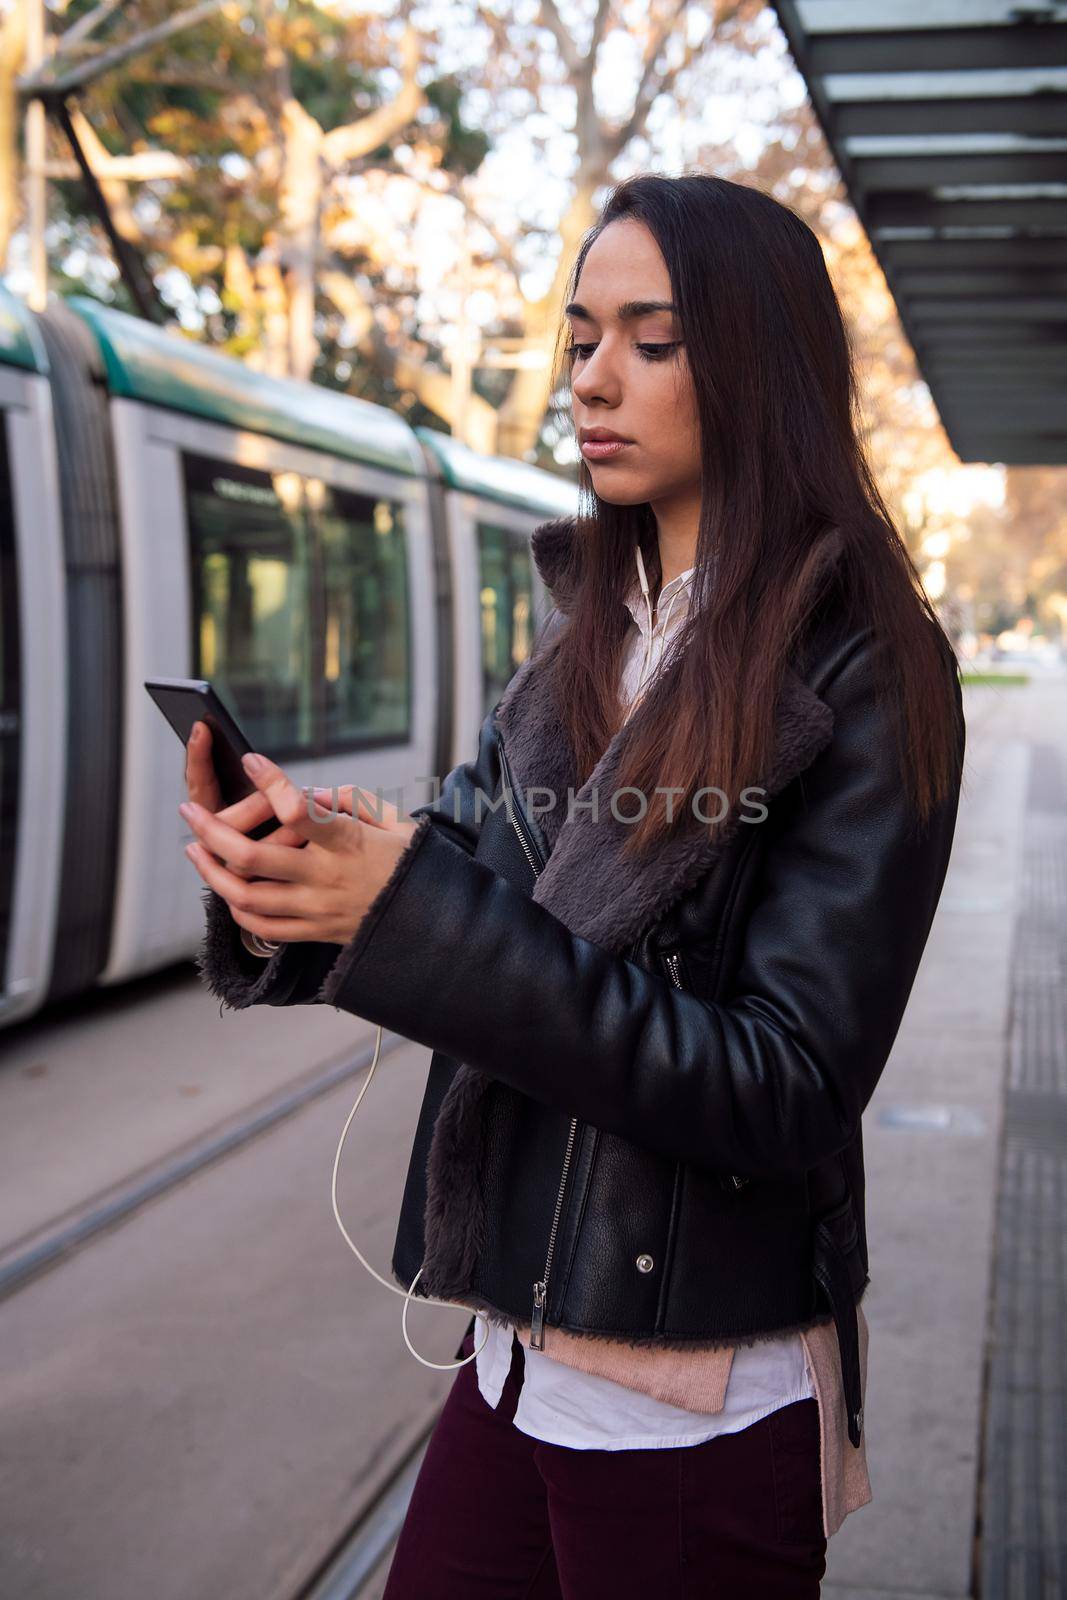 woman consulting her telephone at the streetcar stop by raulmelldo